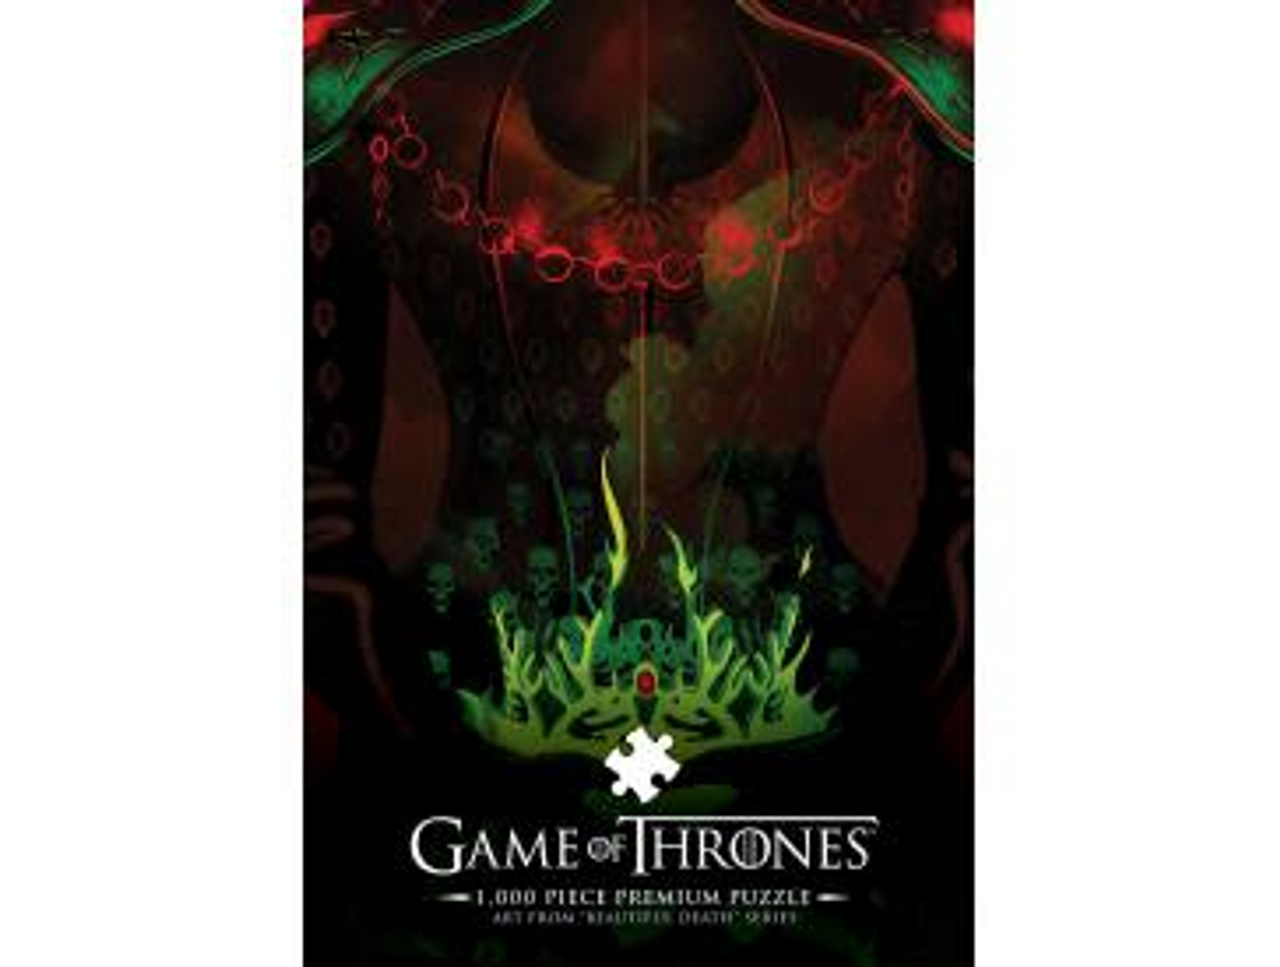 Game of Thrones "Long May She Reign" 1000 Piece Puzzle